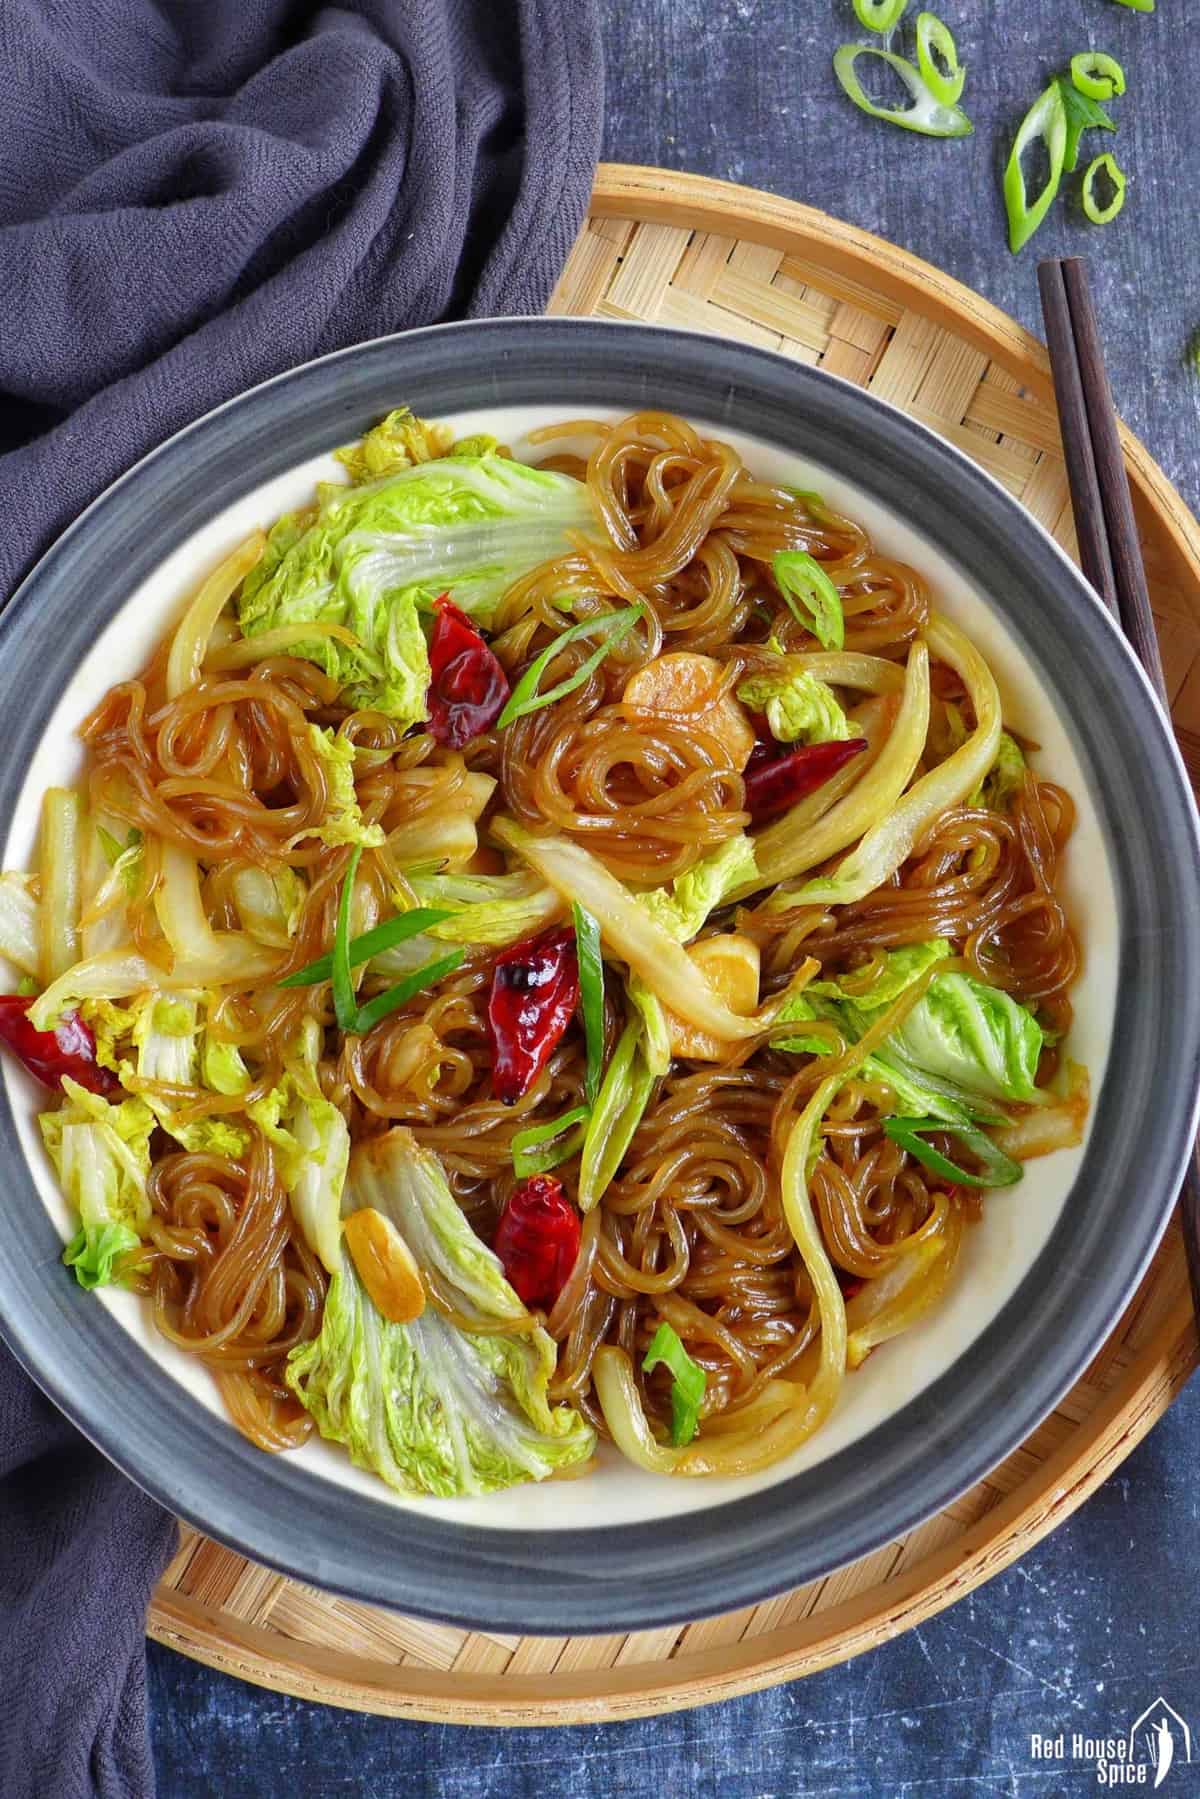 a plate of glass noodles braised with Napa cabbage